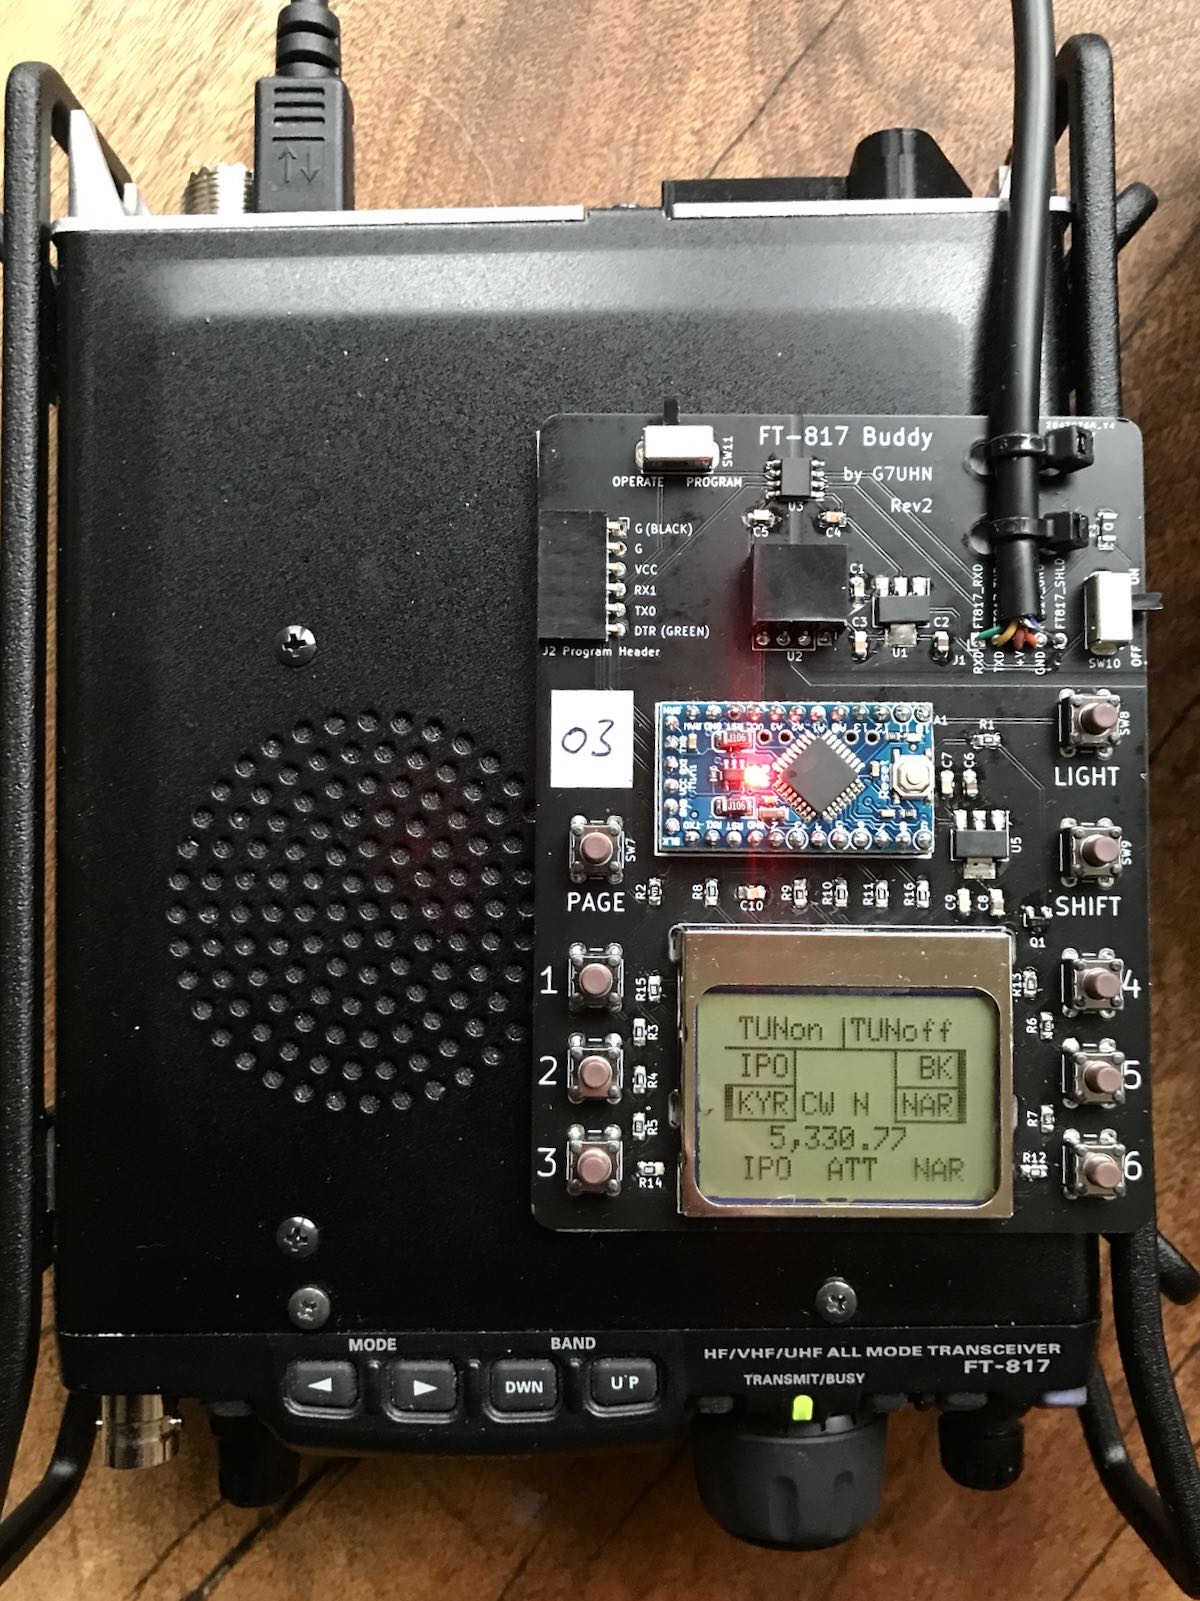 Upgrading my Yaesu FT-817 transceiver with the G7UHN rev2 Buddy board | The  SWLing Post